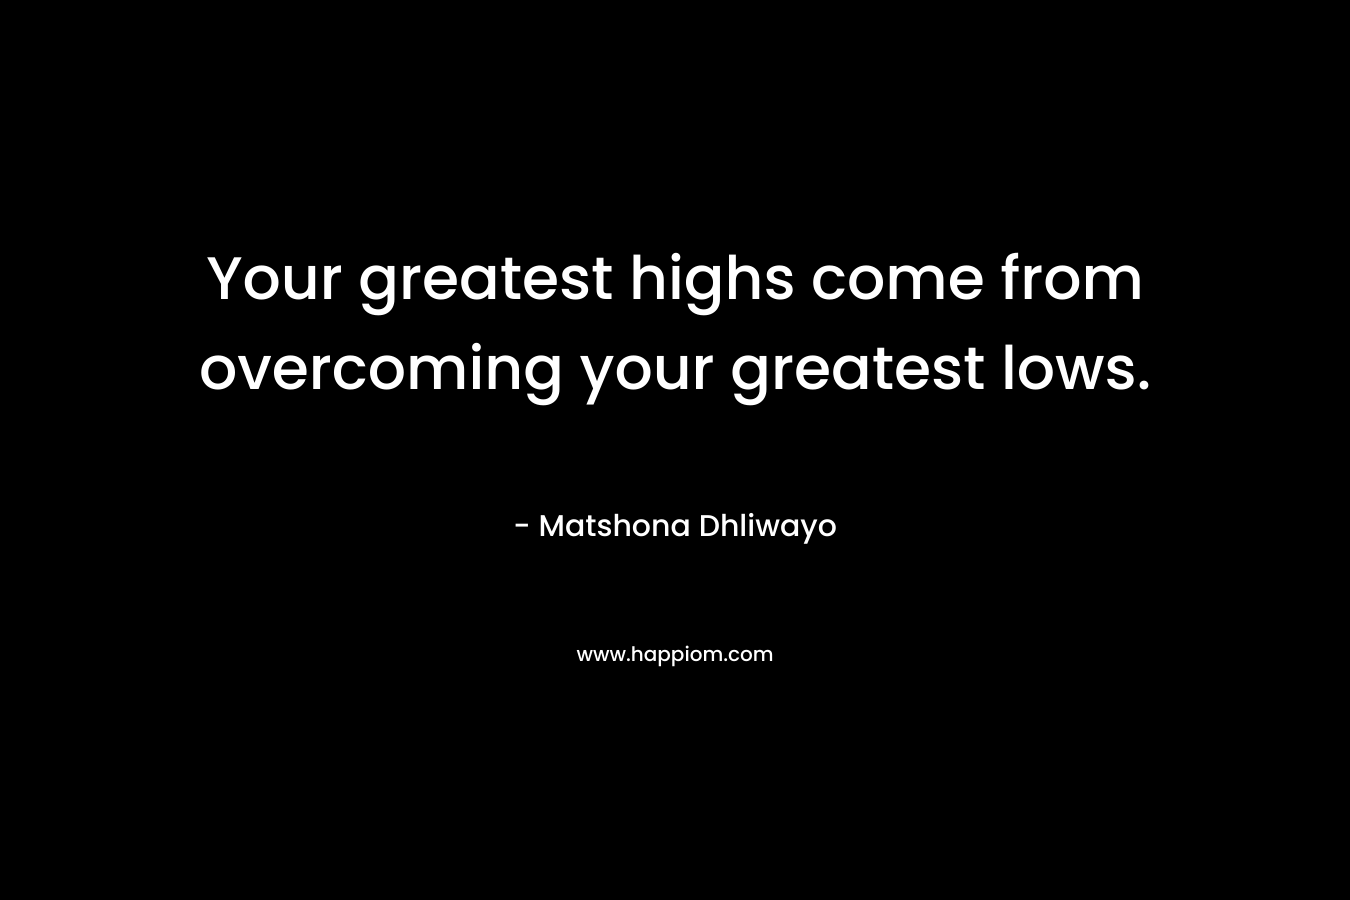 Your greatest highs come from overcoming your greatest lows.